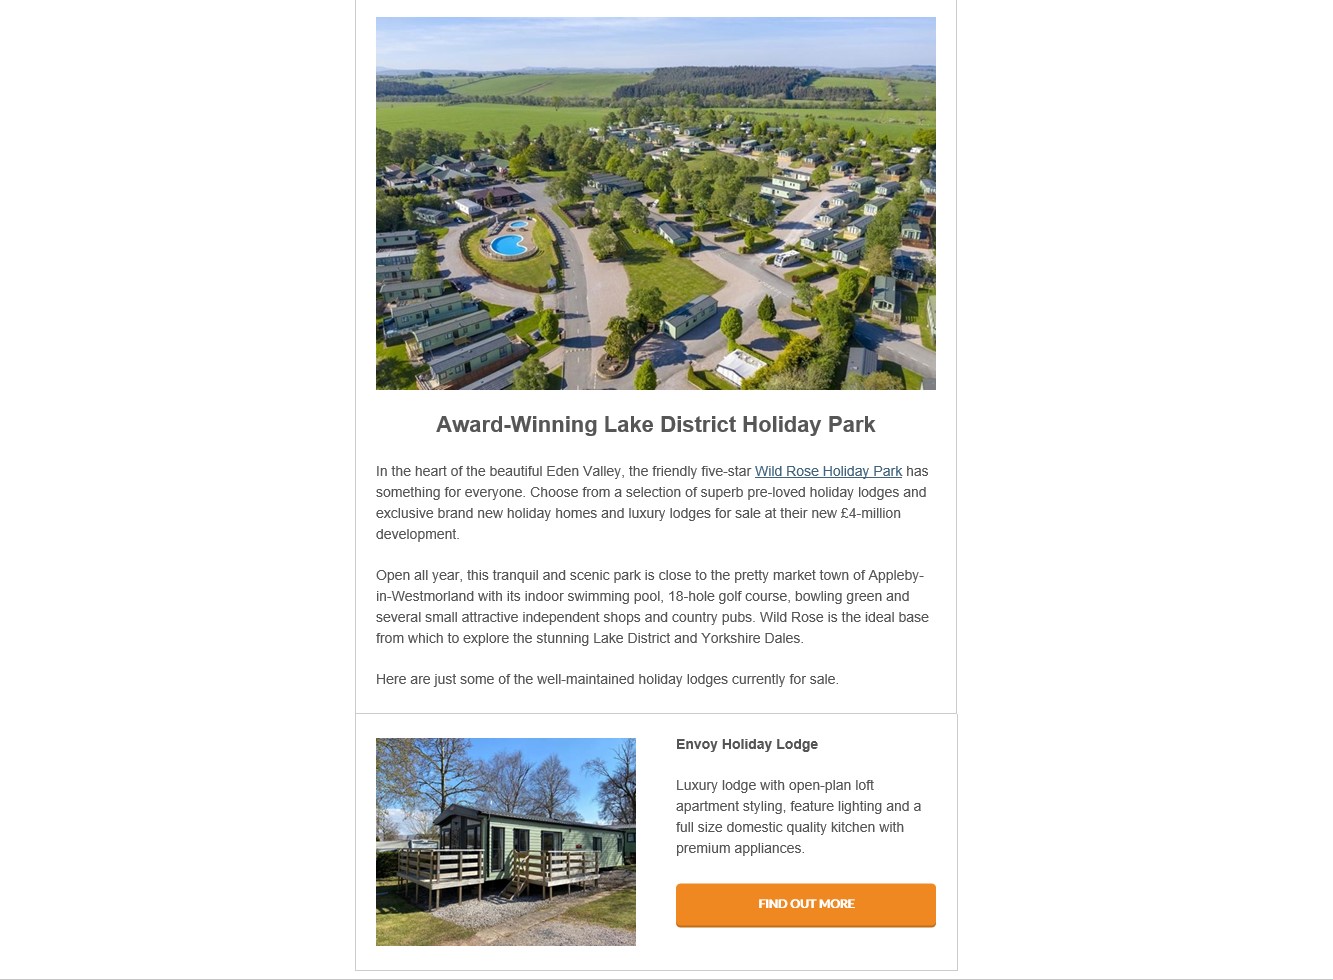 email marketing for holiday parks